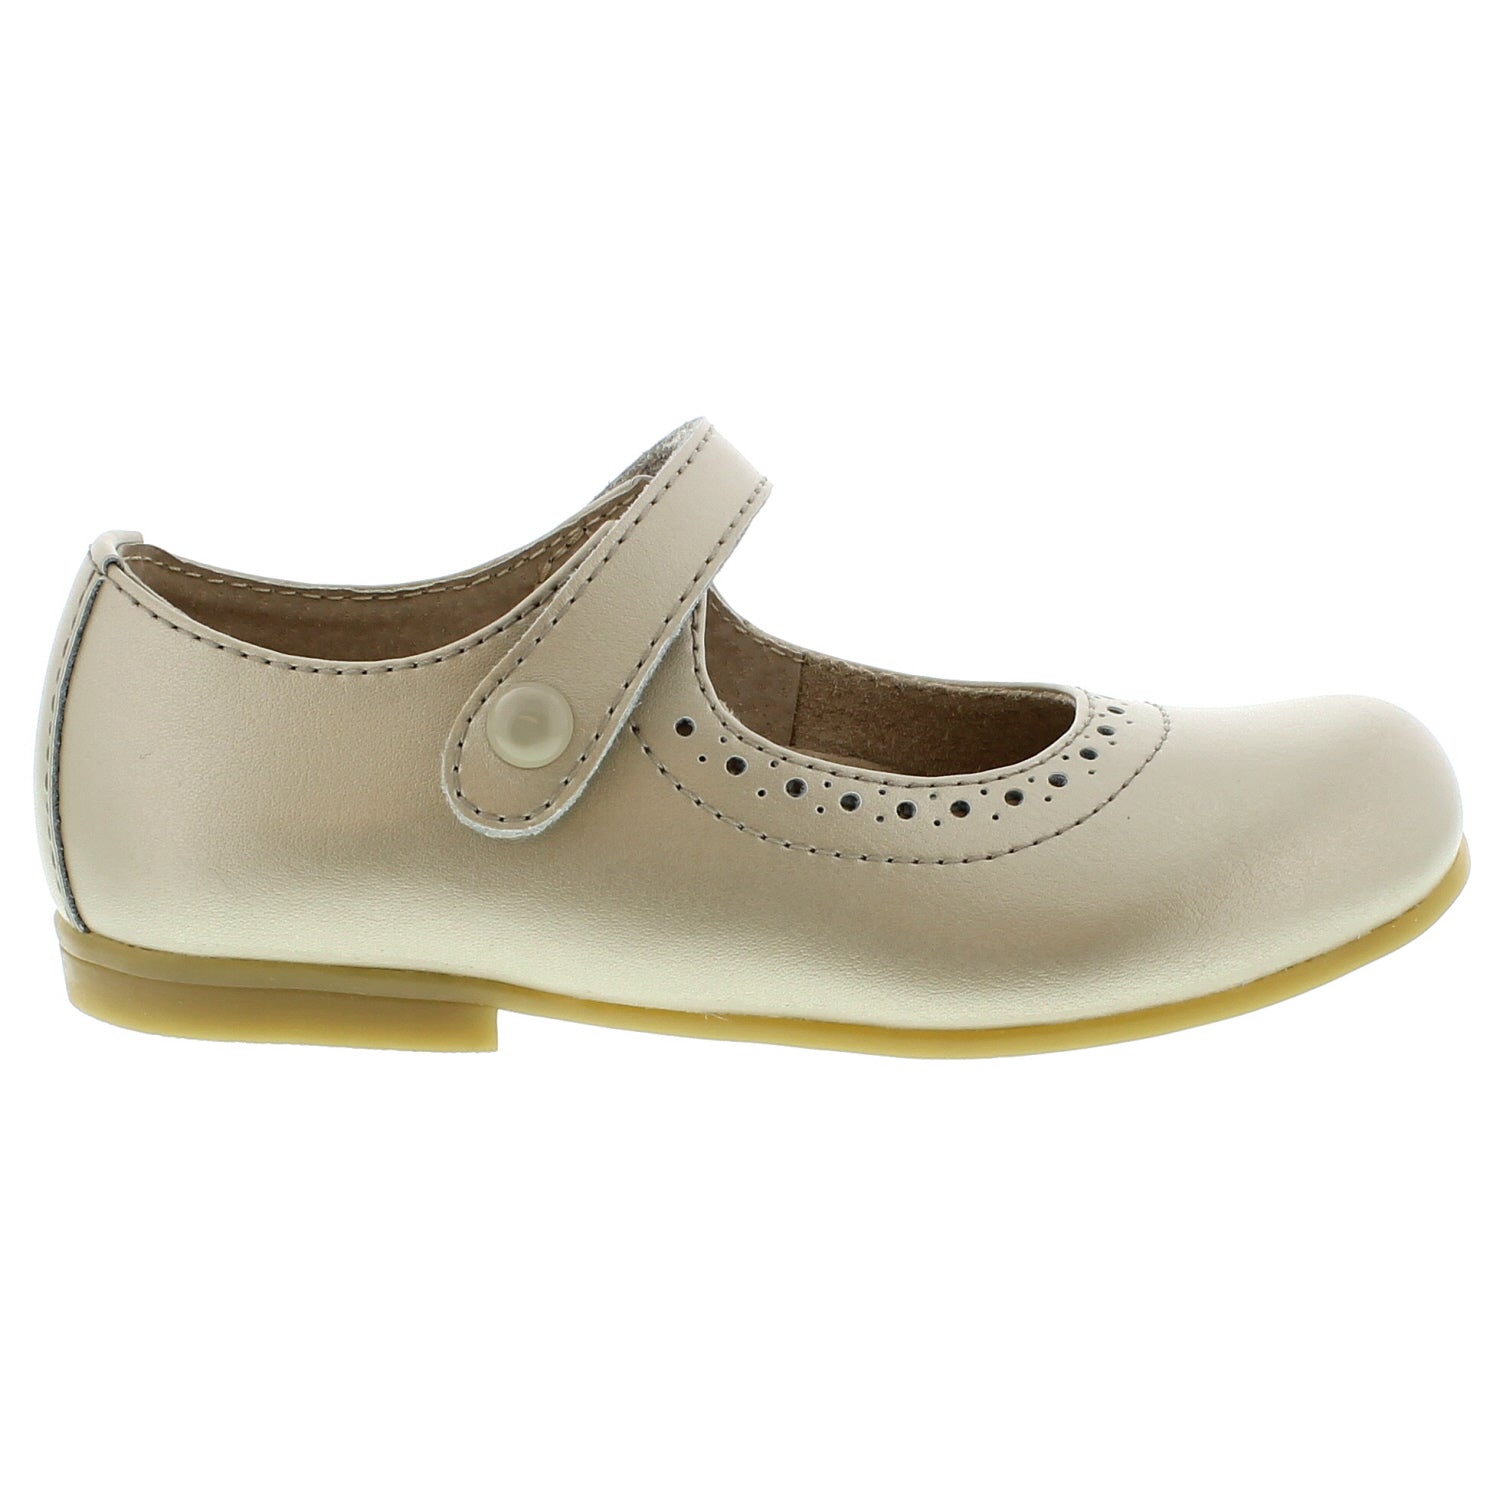 SHERRY T-STRAP BTS - Sikes Children's Shoe Store